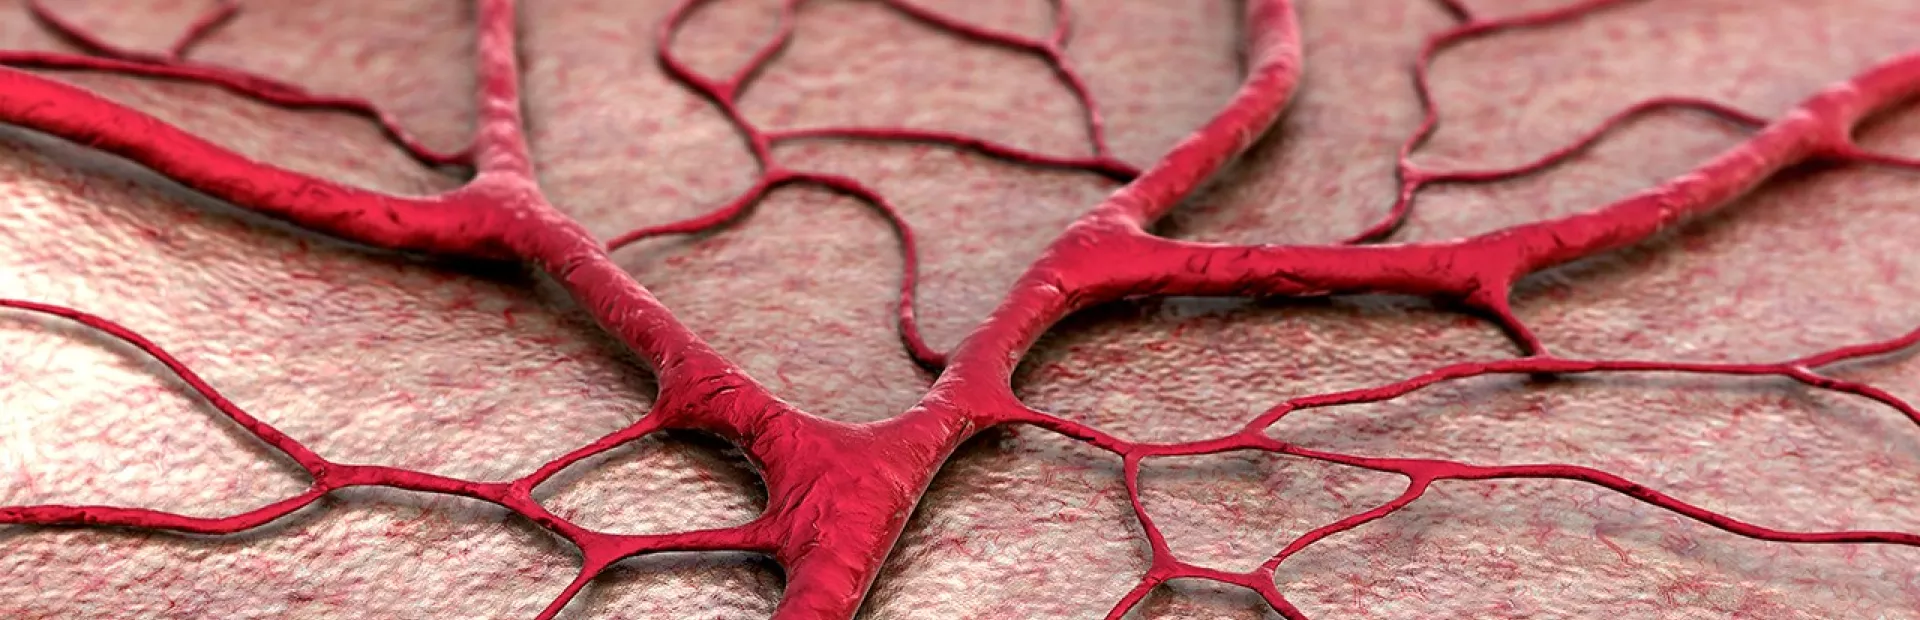 Capillary and blood vessels